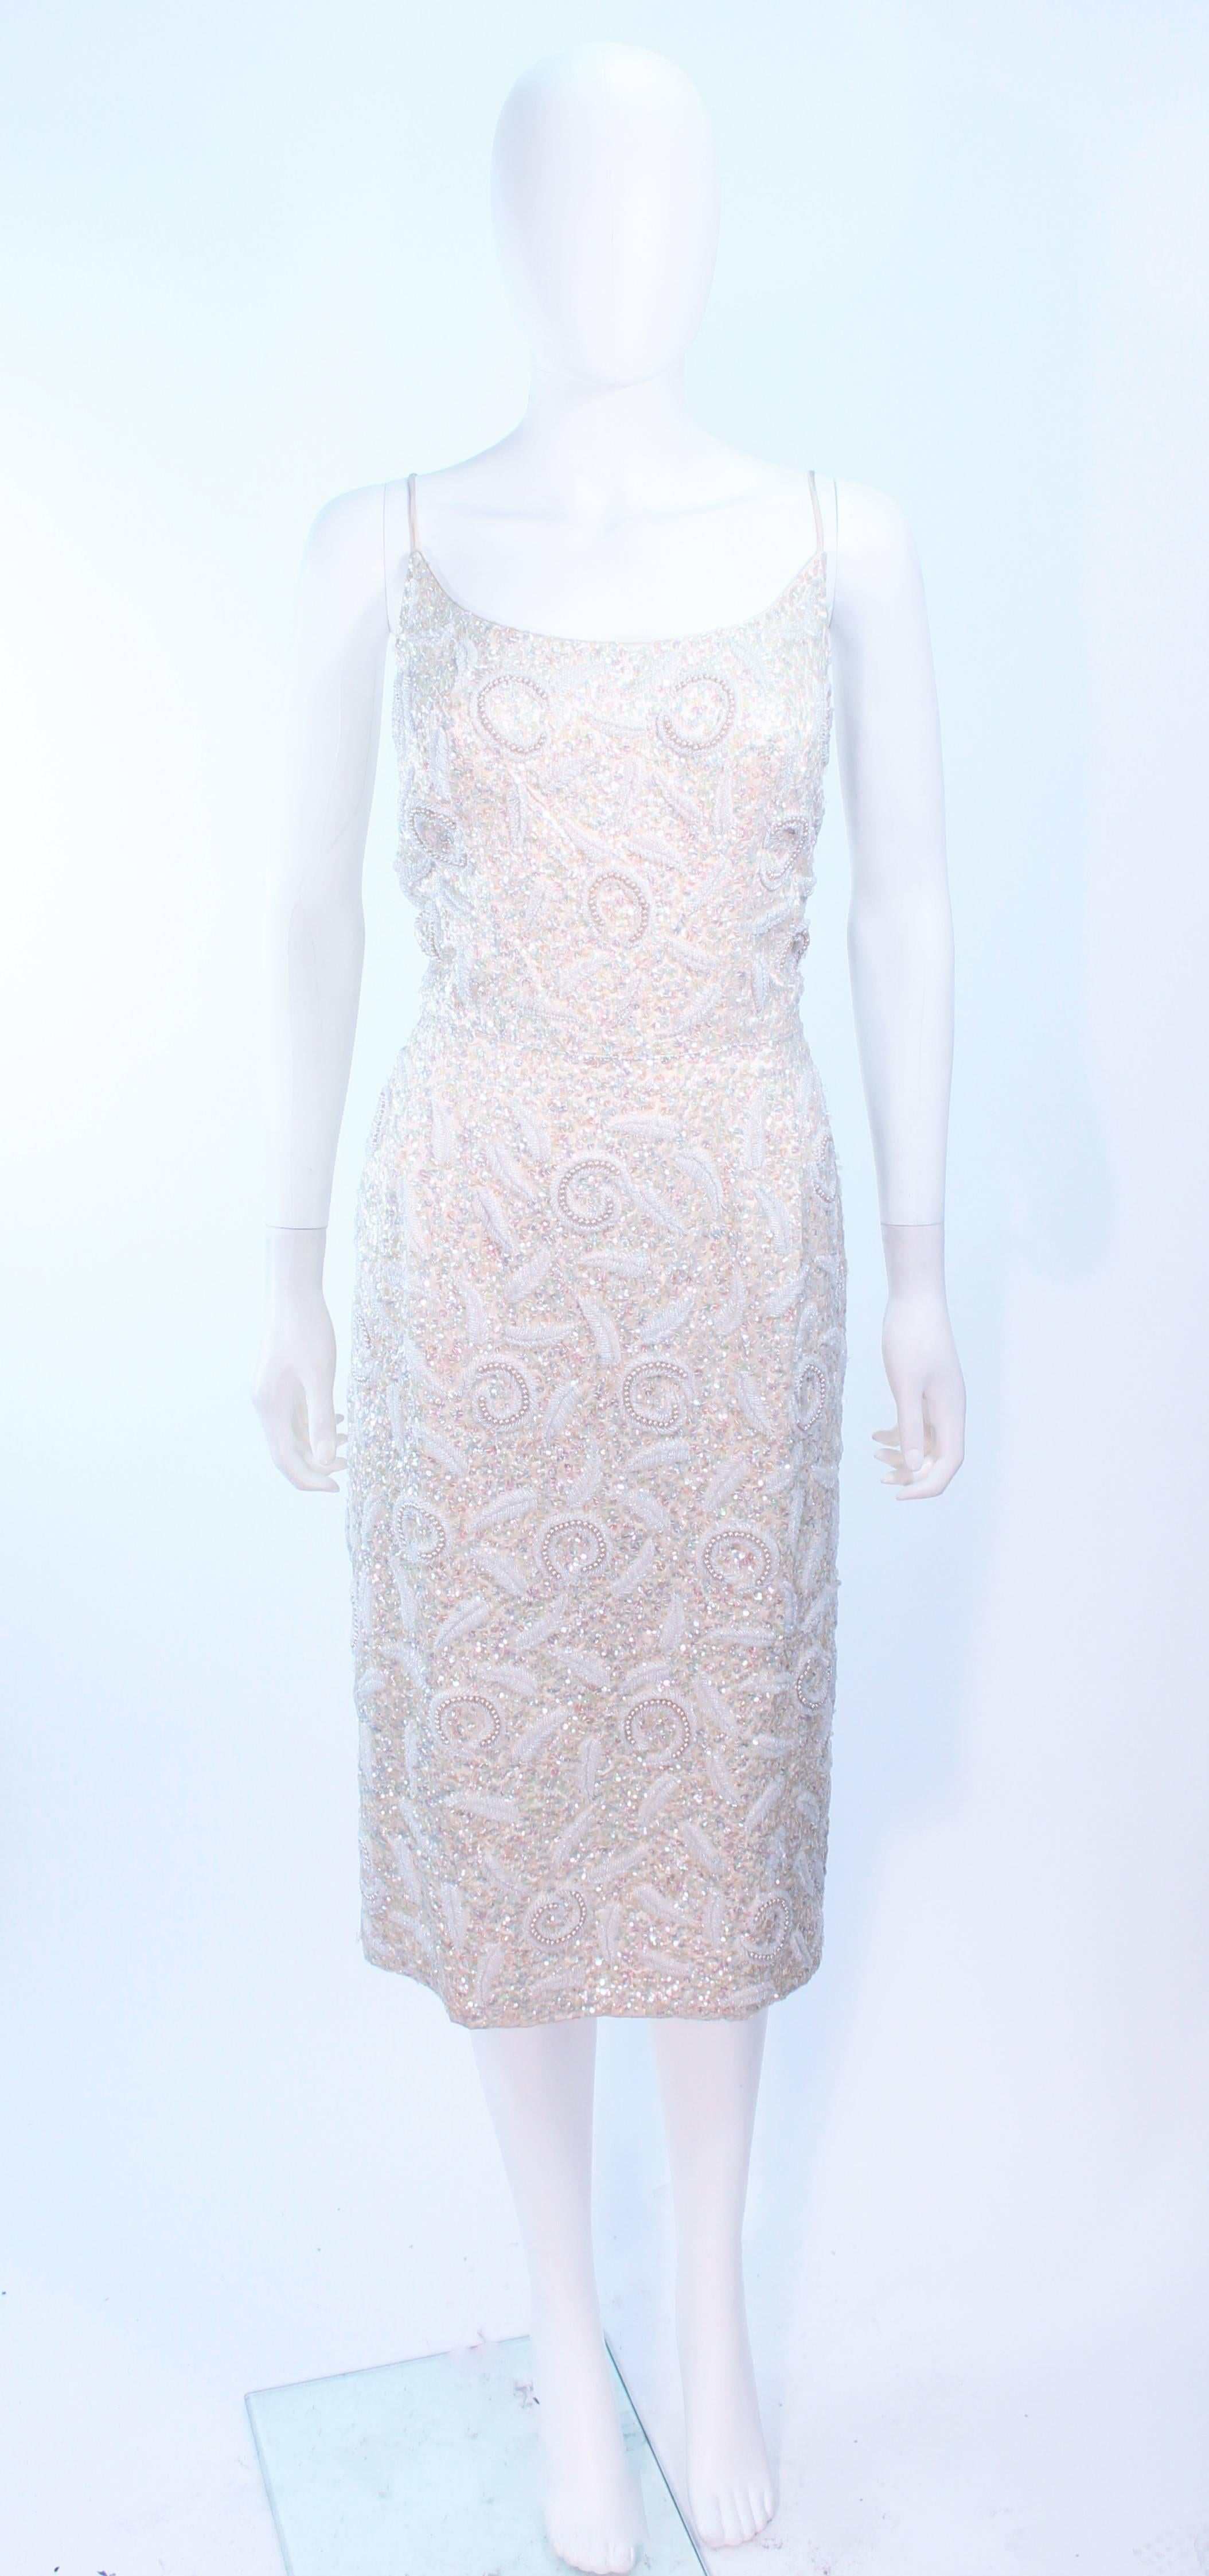 This Haute Couture International cocktail dress is composed of an off white silk with iridescent sequin applique in a floral motif. There is a center back zipper closure. In excellent vintage condition.

**Please cross-reference measurements for